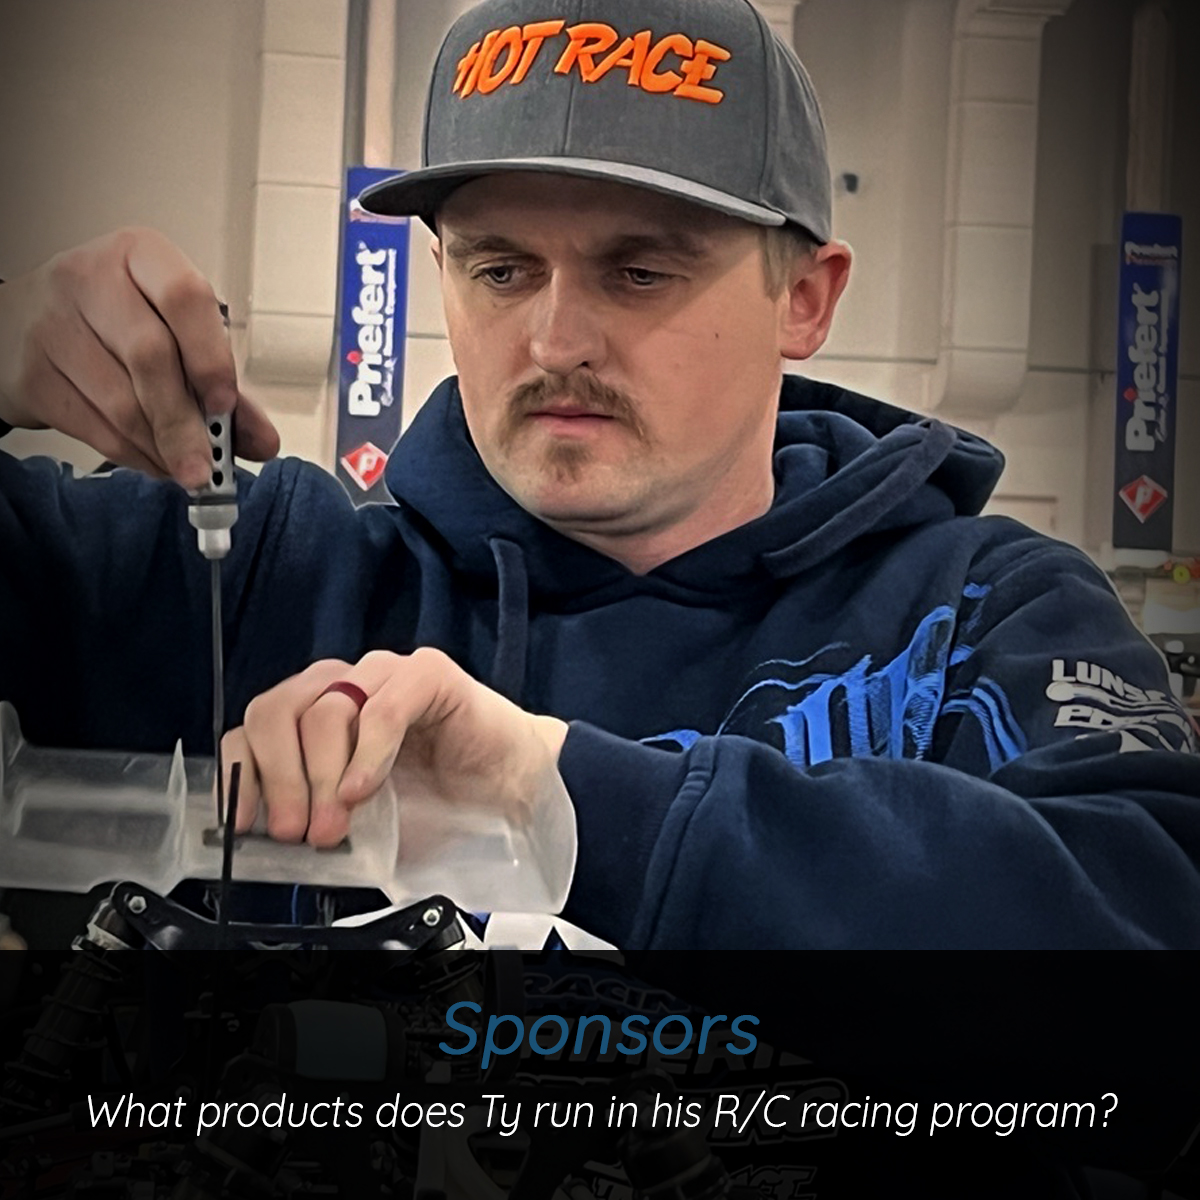 What brands does Ty use in his RC race program?